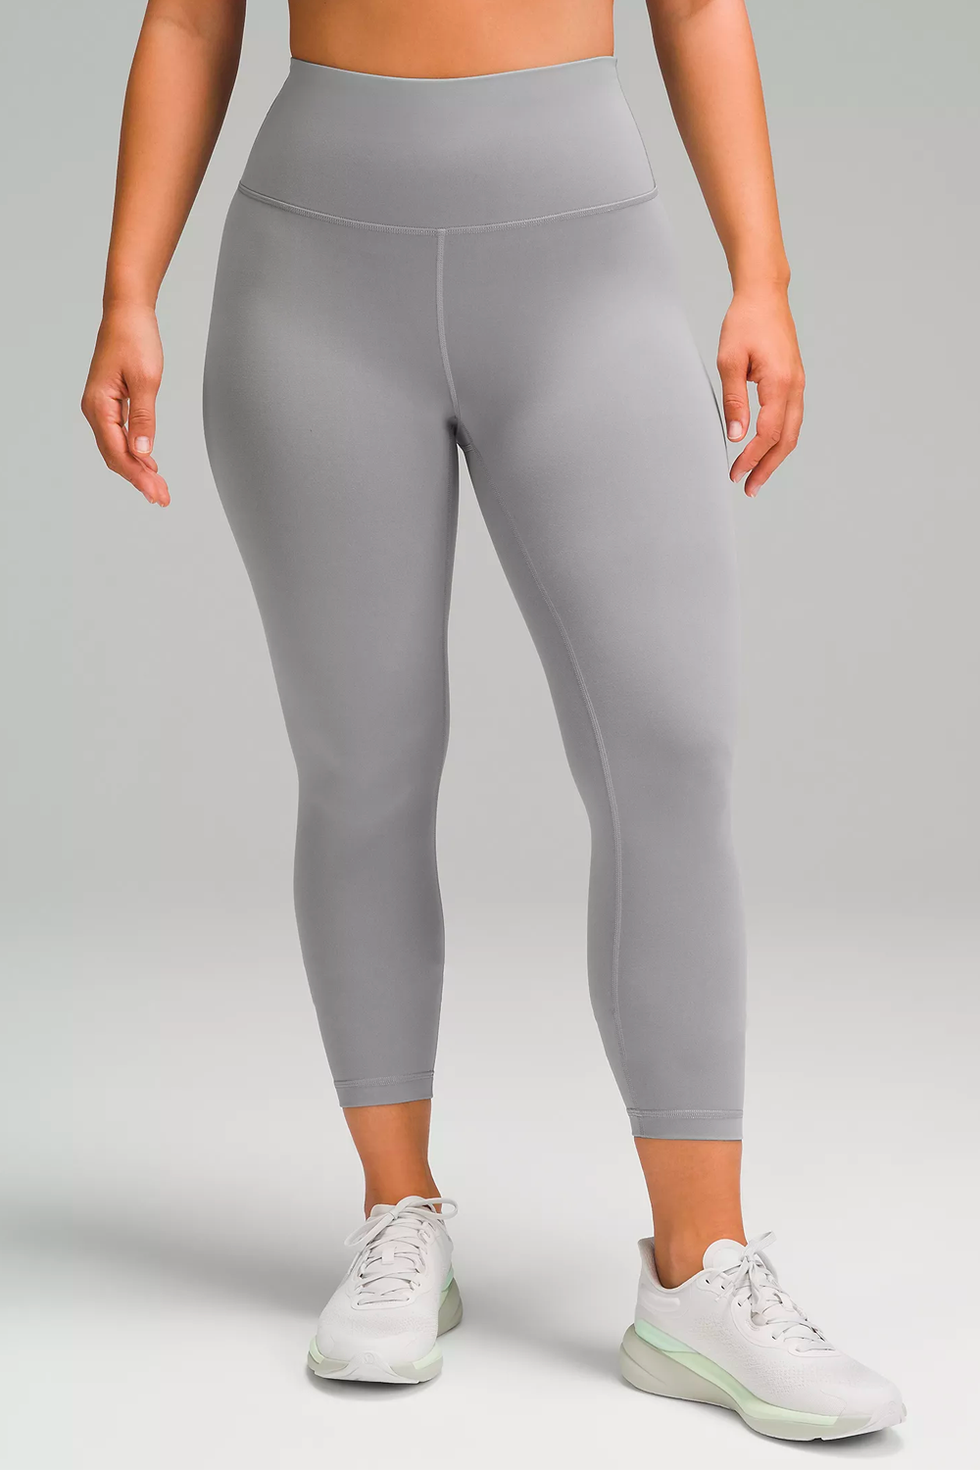 Grey lululemon leggings with pockets. Only